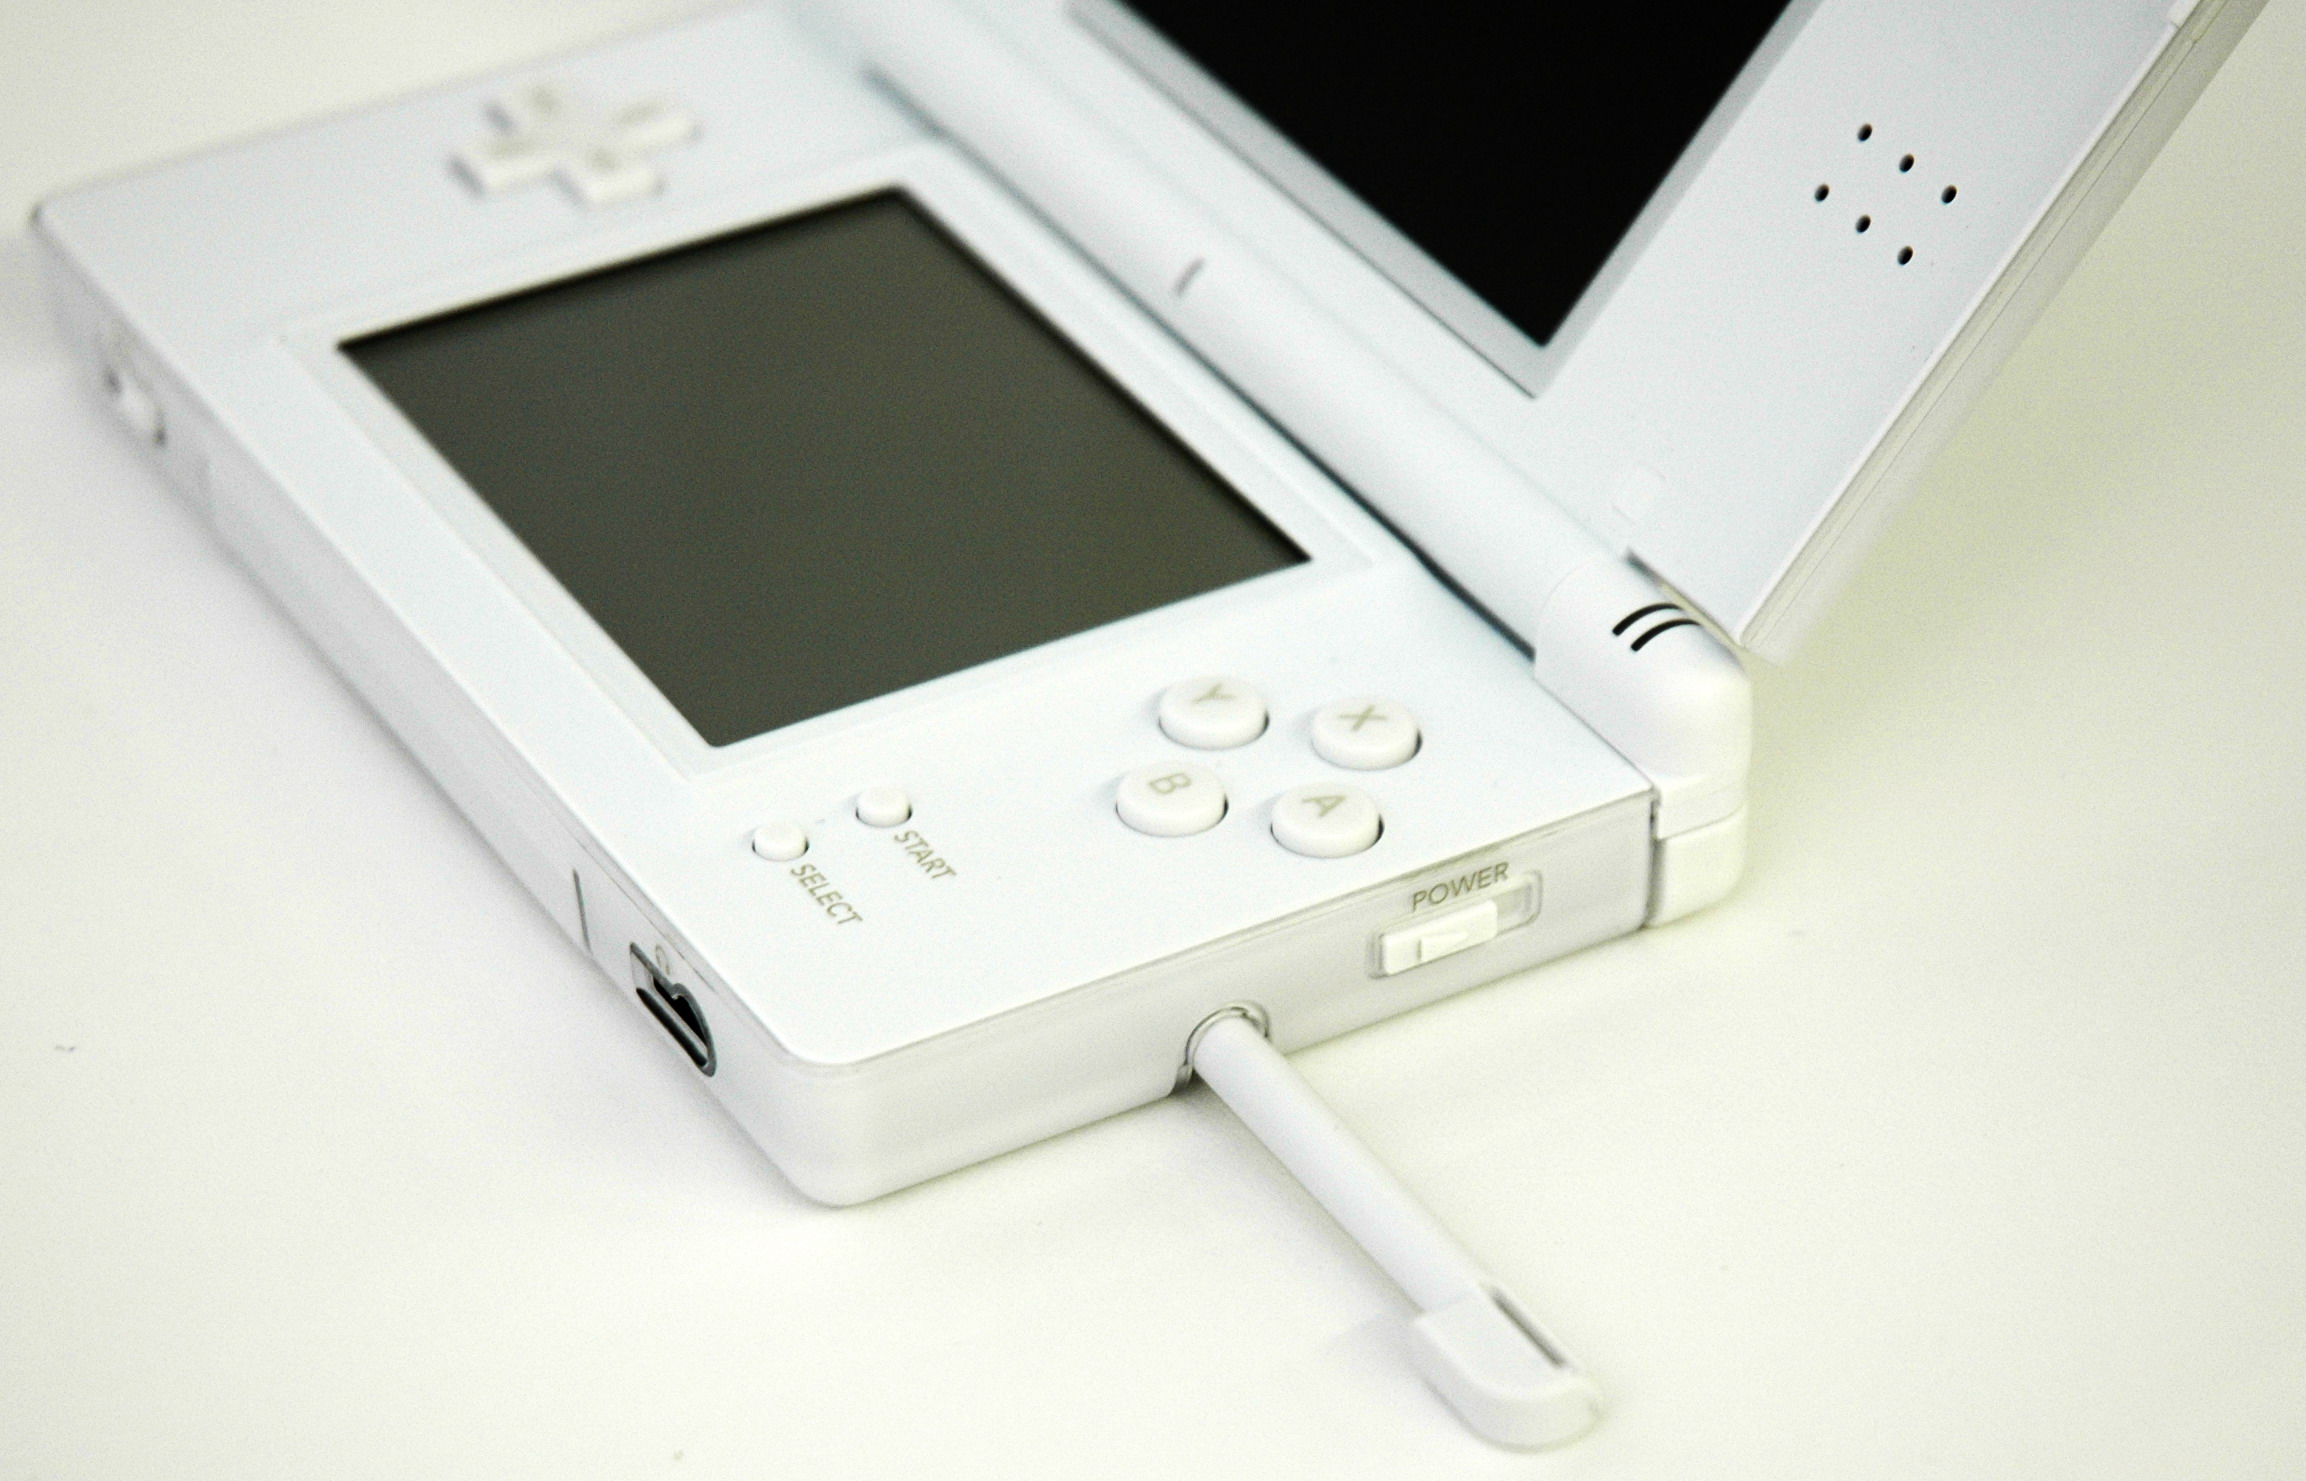 A view of the right side of the Nintendo DS Lite.